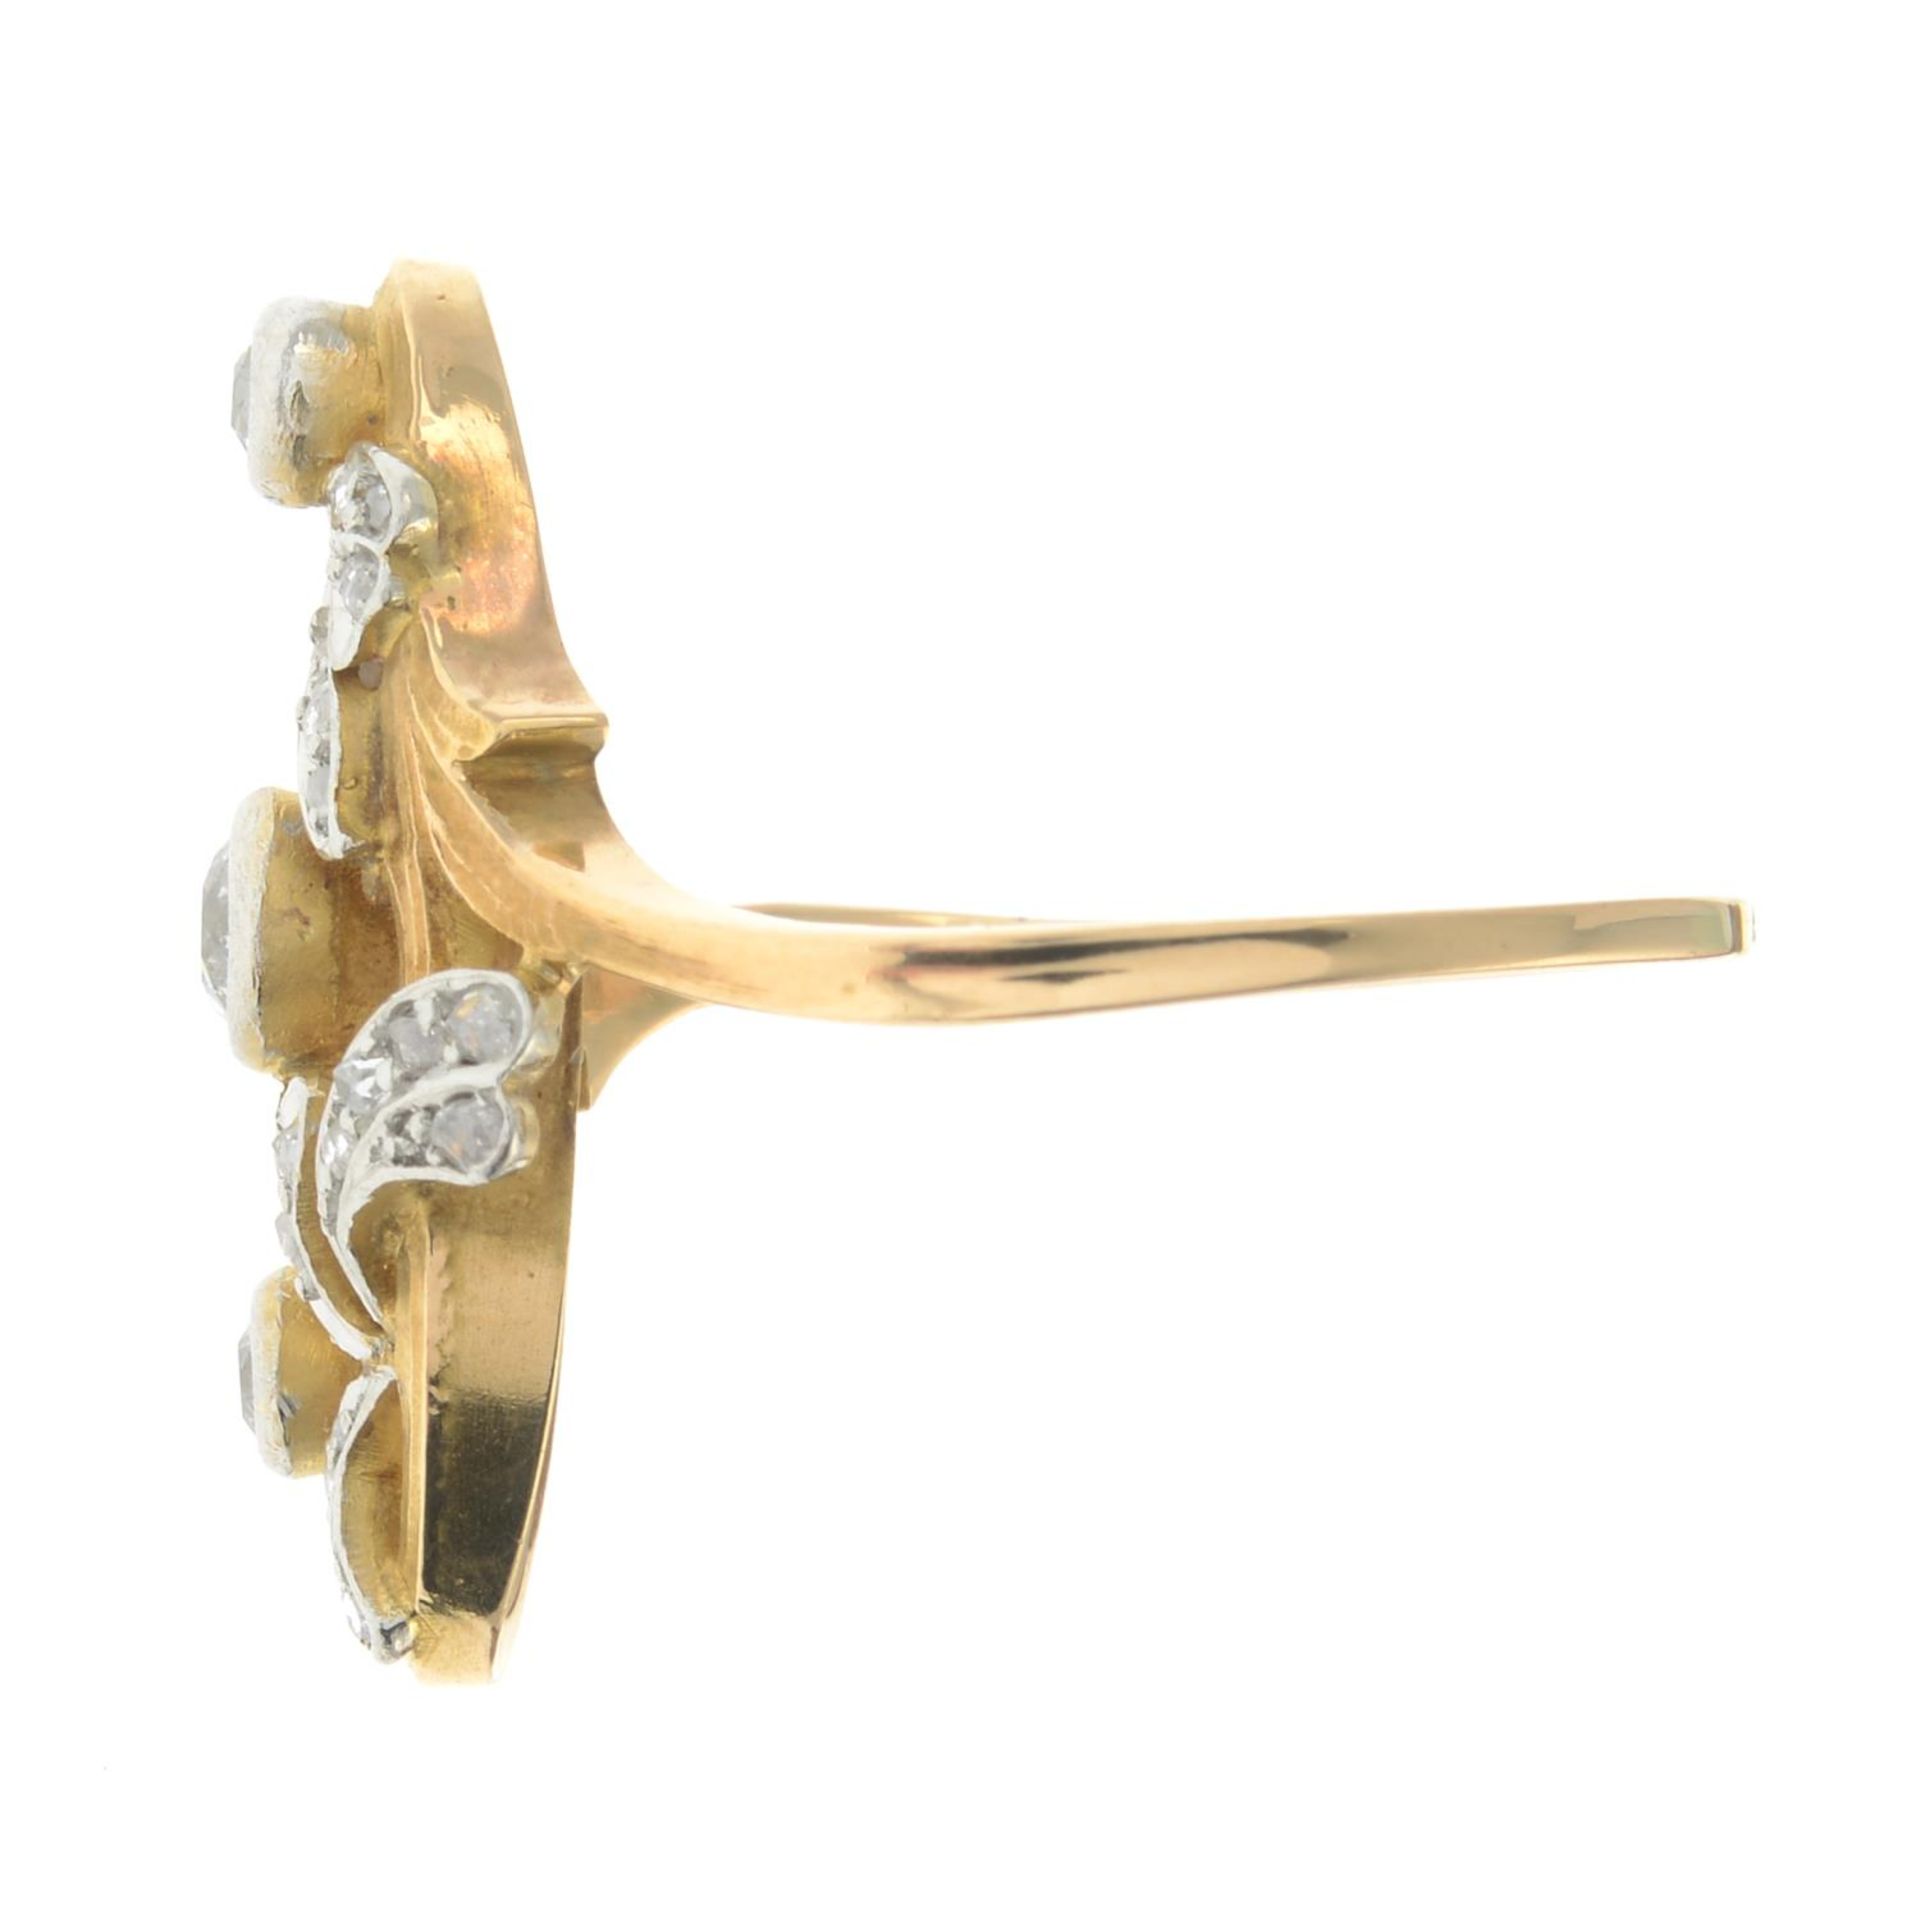 An Art Nouveau 18ct gold old and rose-cut diamond dress ring.Estimated old-cut diamond weight - Image 2 of 3